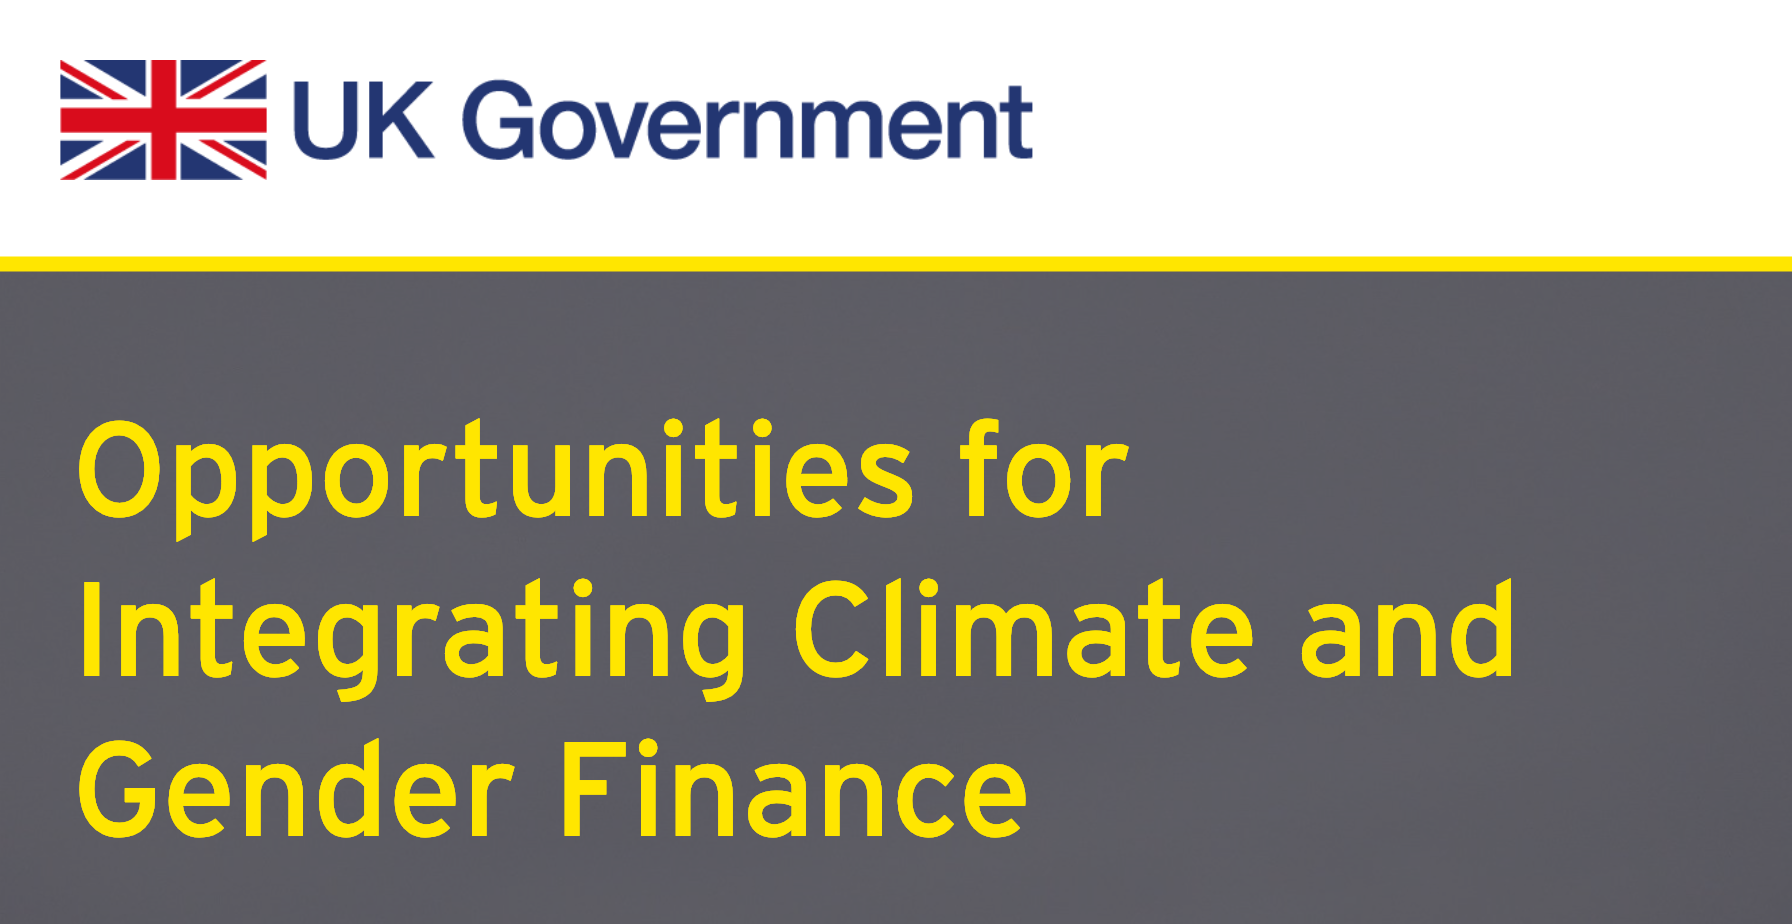 Opportunities for Integrating Climate and Gender Finance